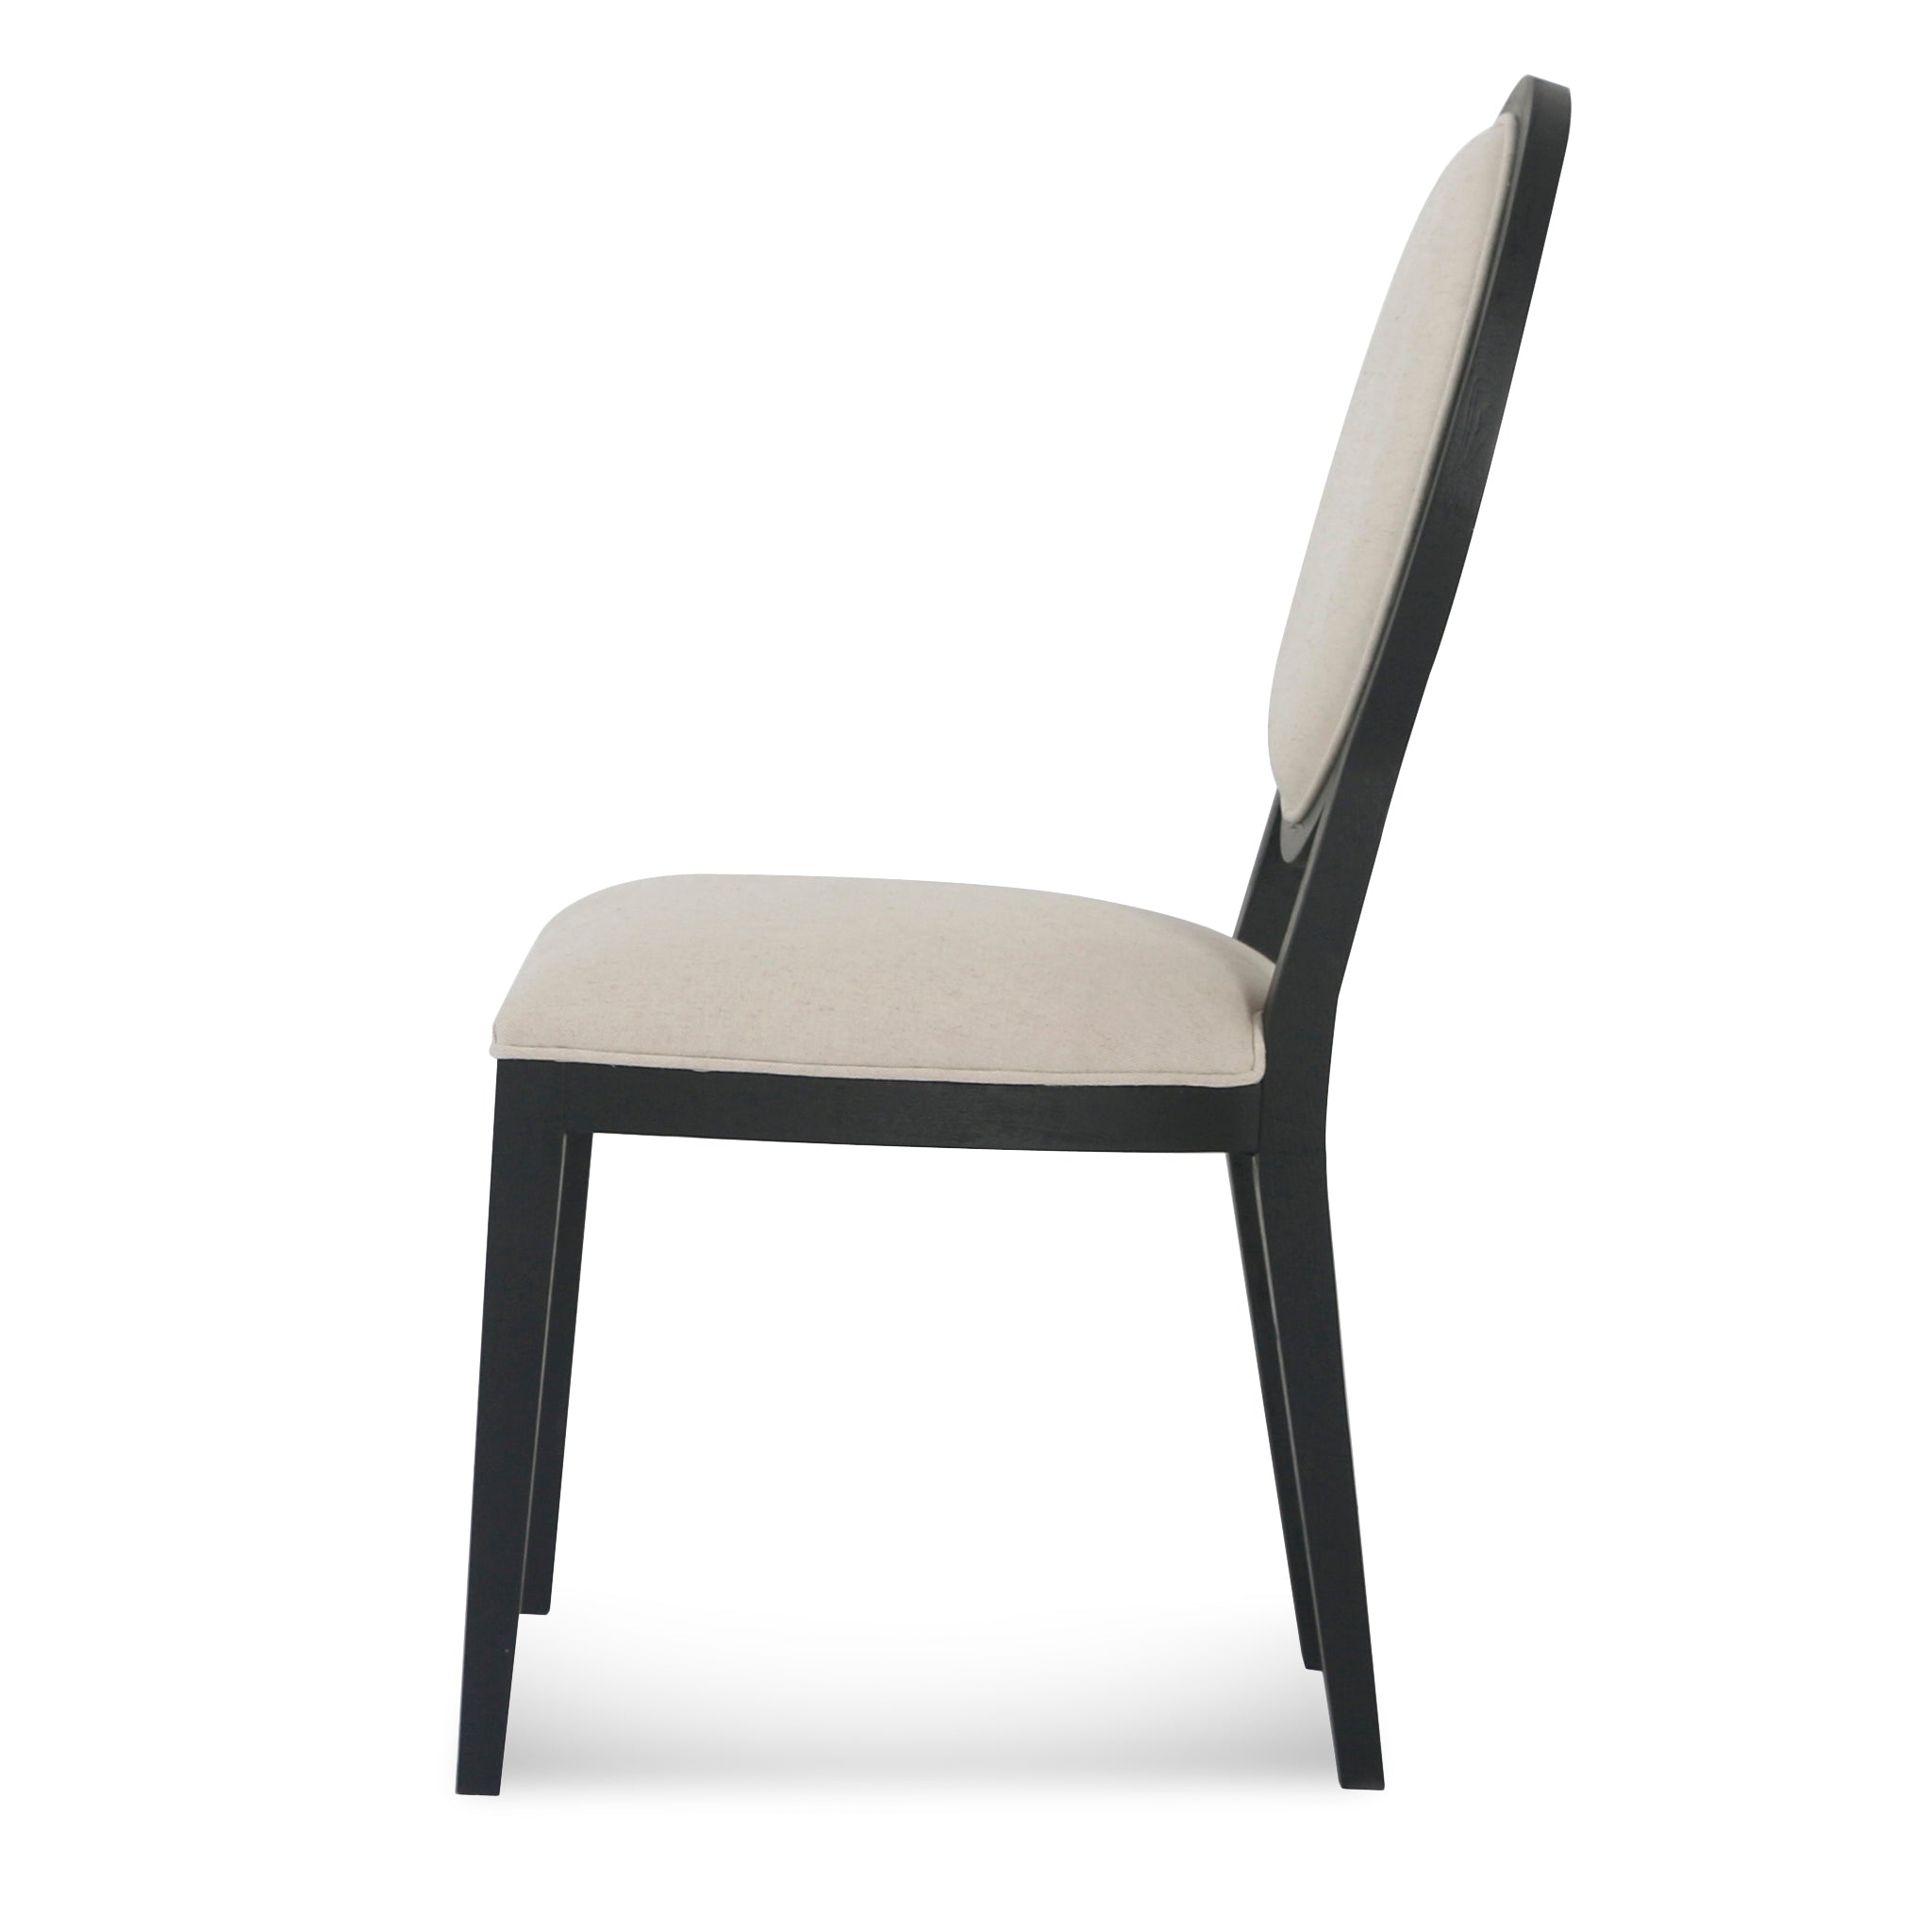 Set of 2 Ayla Fabric Dining Chair - Beige and Black - Dining Chairs